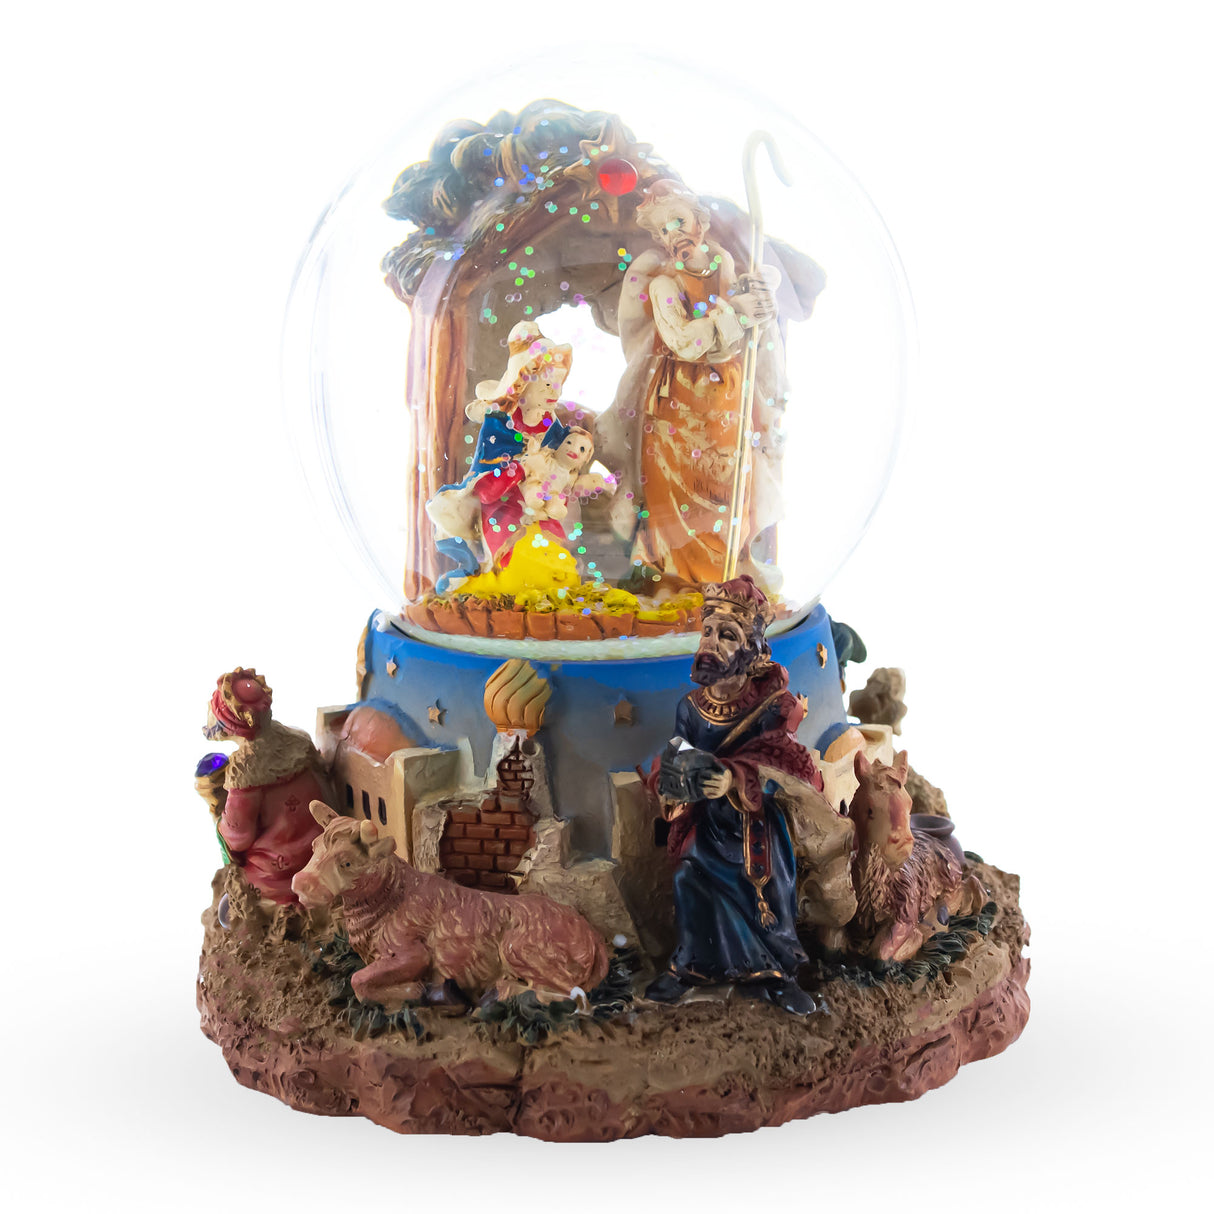 Resin Regal Gift Bearers: Nativity Scene Musical Water Snow Globe with Kings in Multi color Round